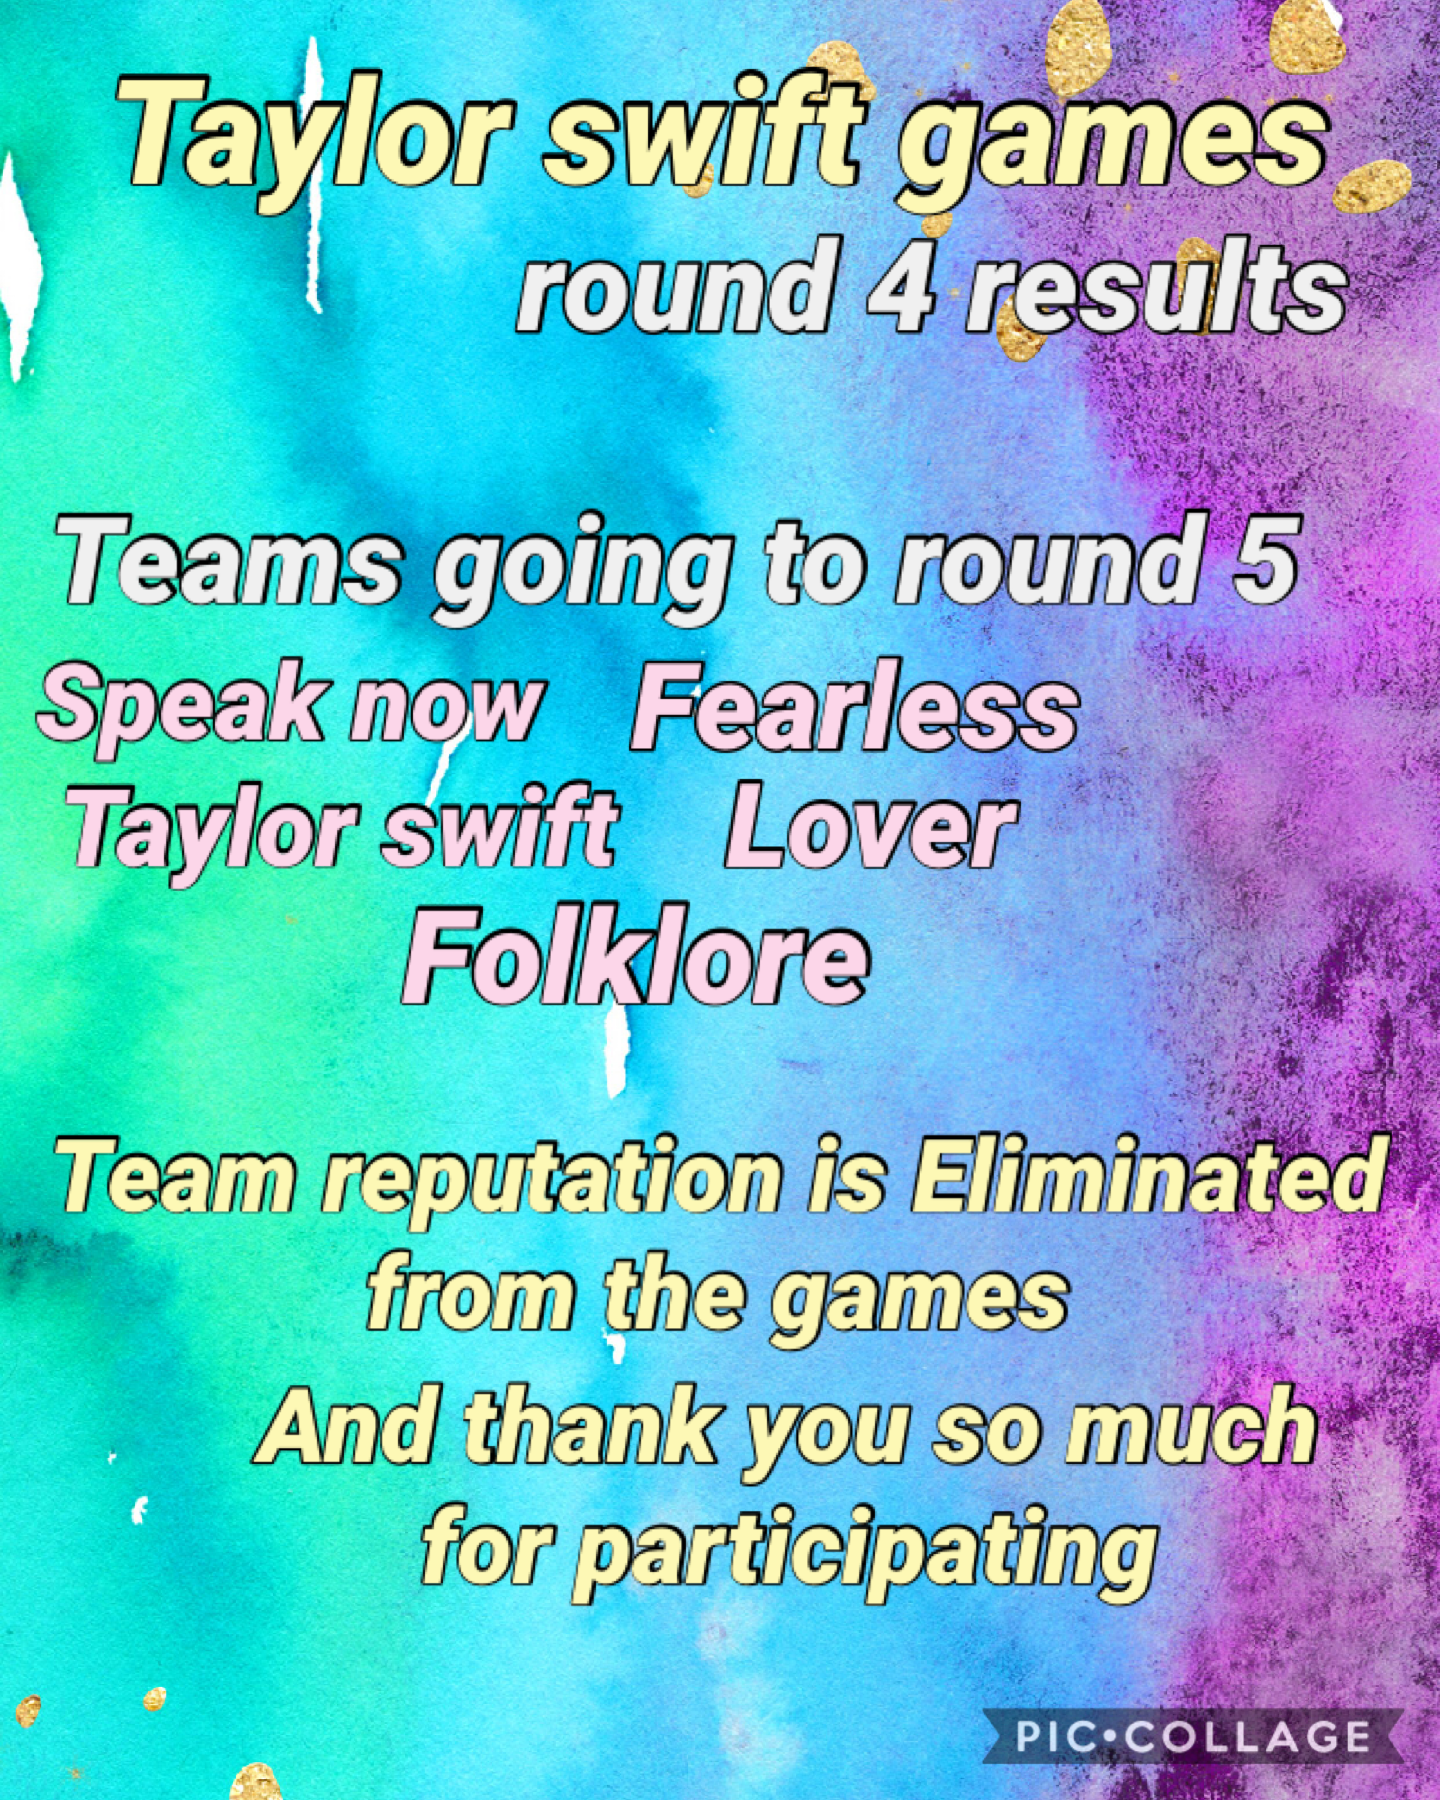 Taylor swift games round 4 results 